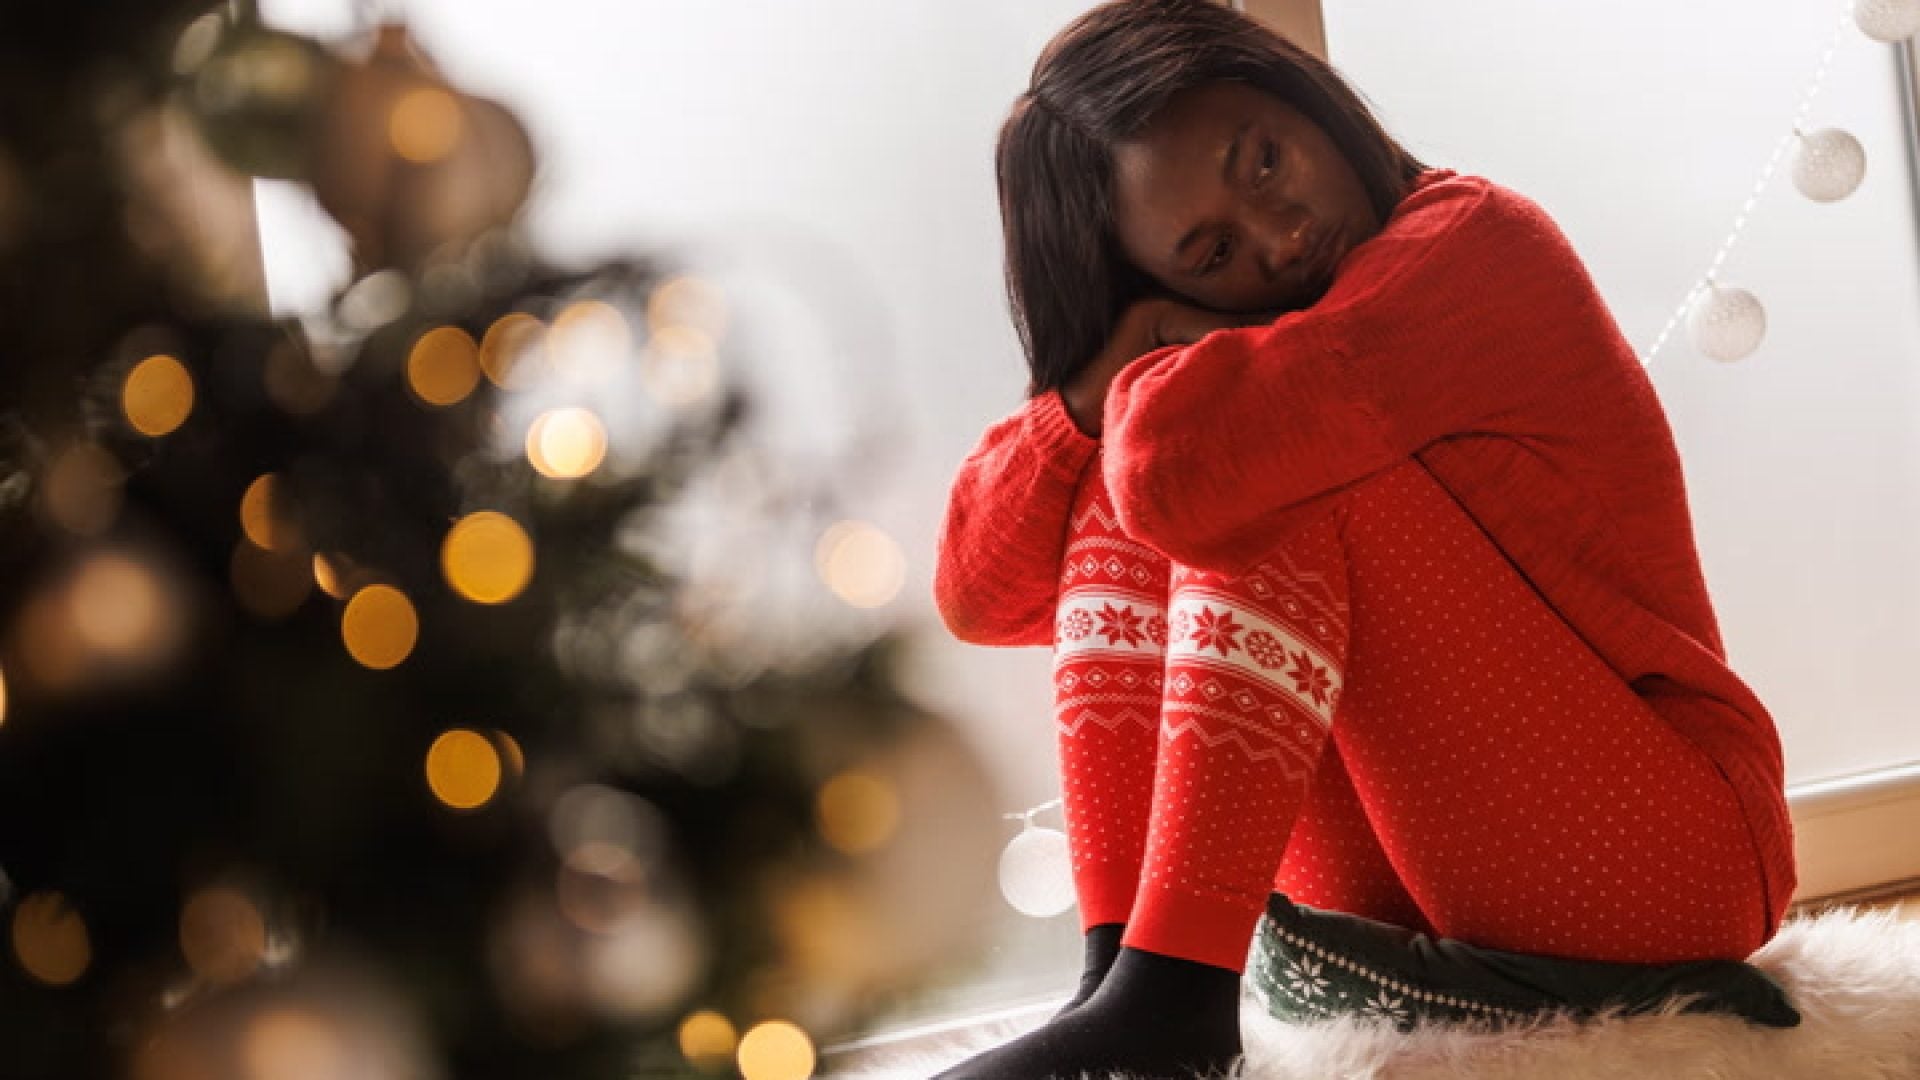 WATCH: How To Address Your Grief During The Holiday Season